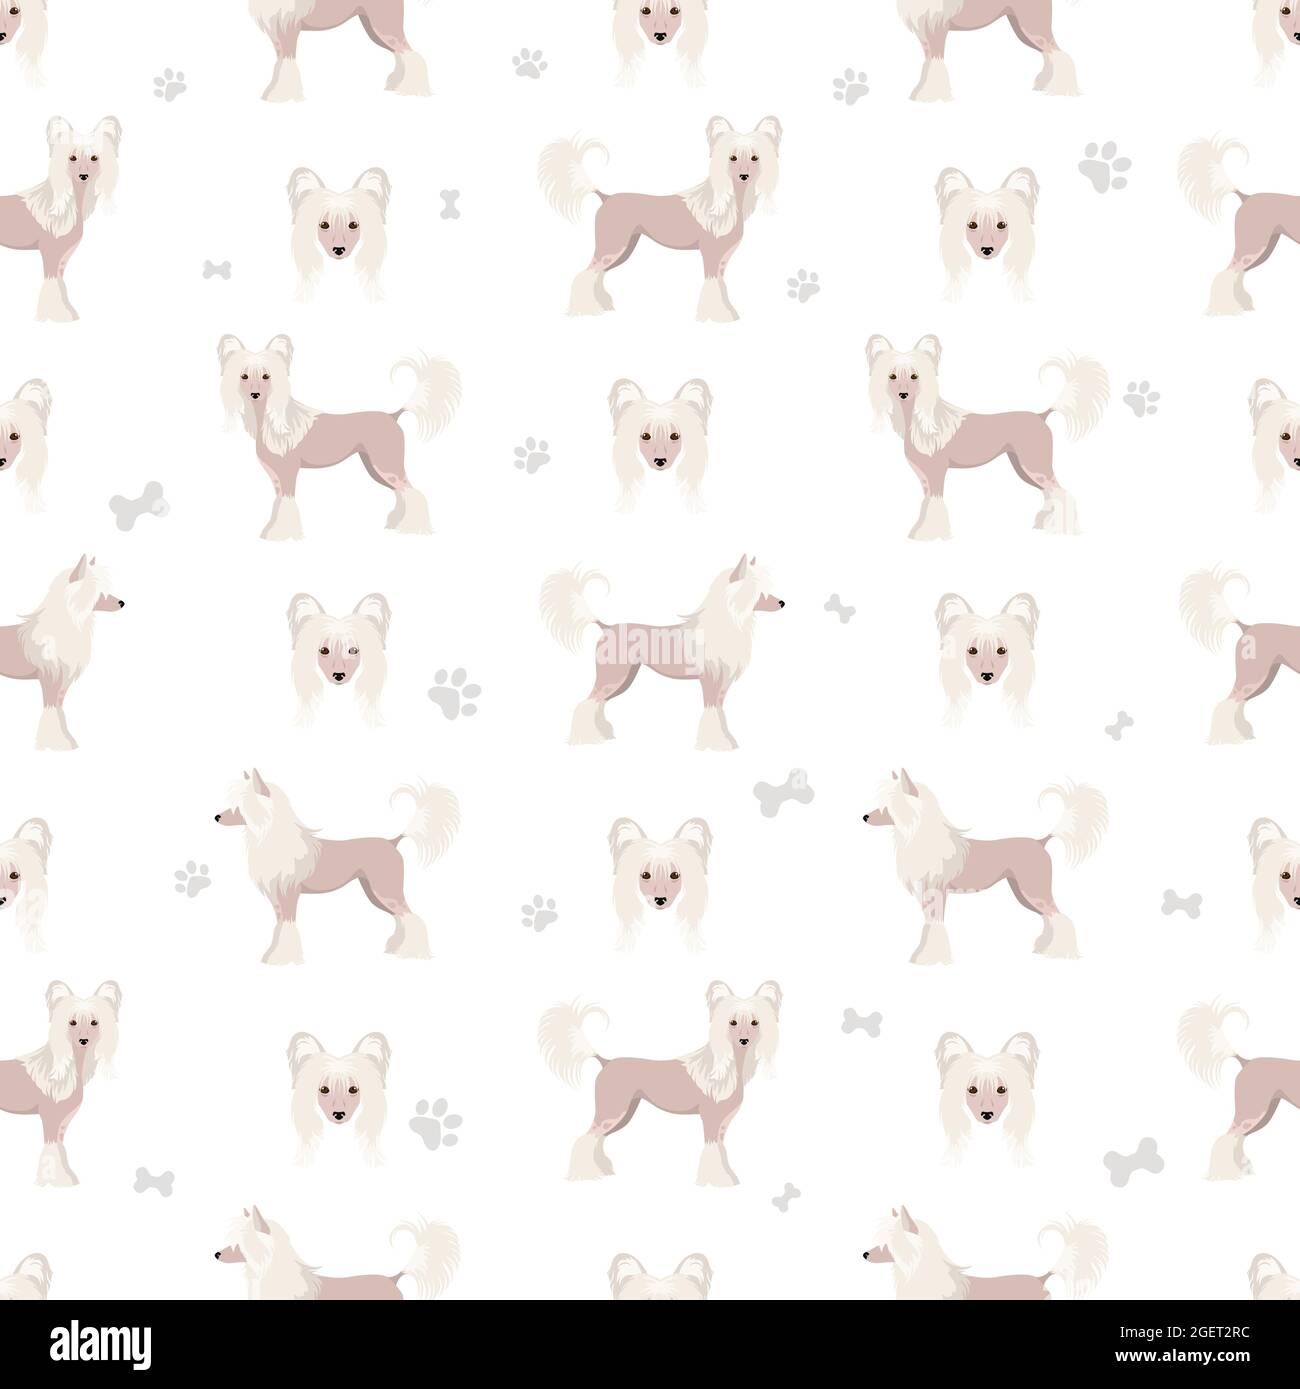 Chinese crested dog hairless variety seamless pattern Different